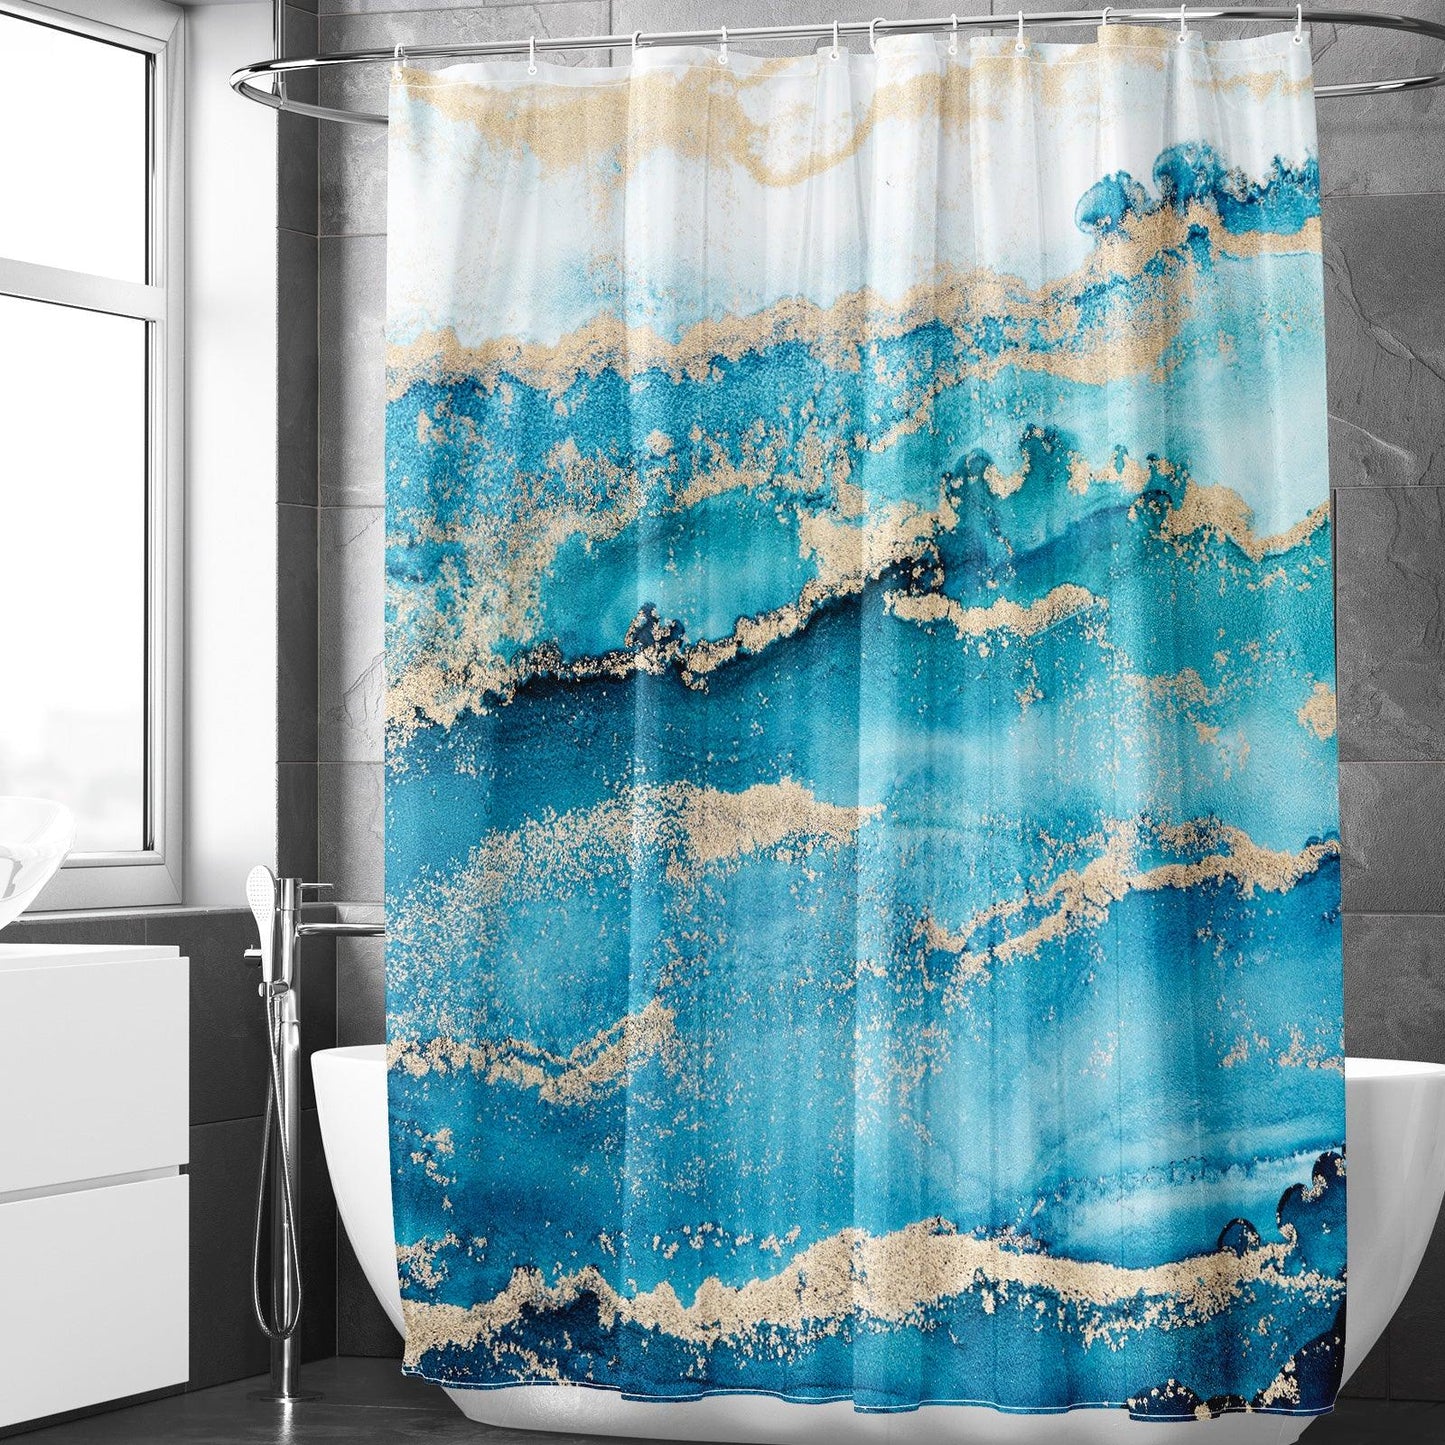 Abstract Marble Shower Curtain Set (Blue Ombre) - Berkin Arts